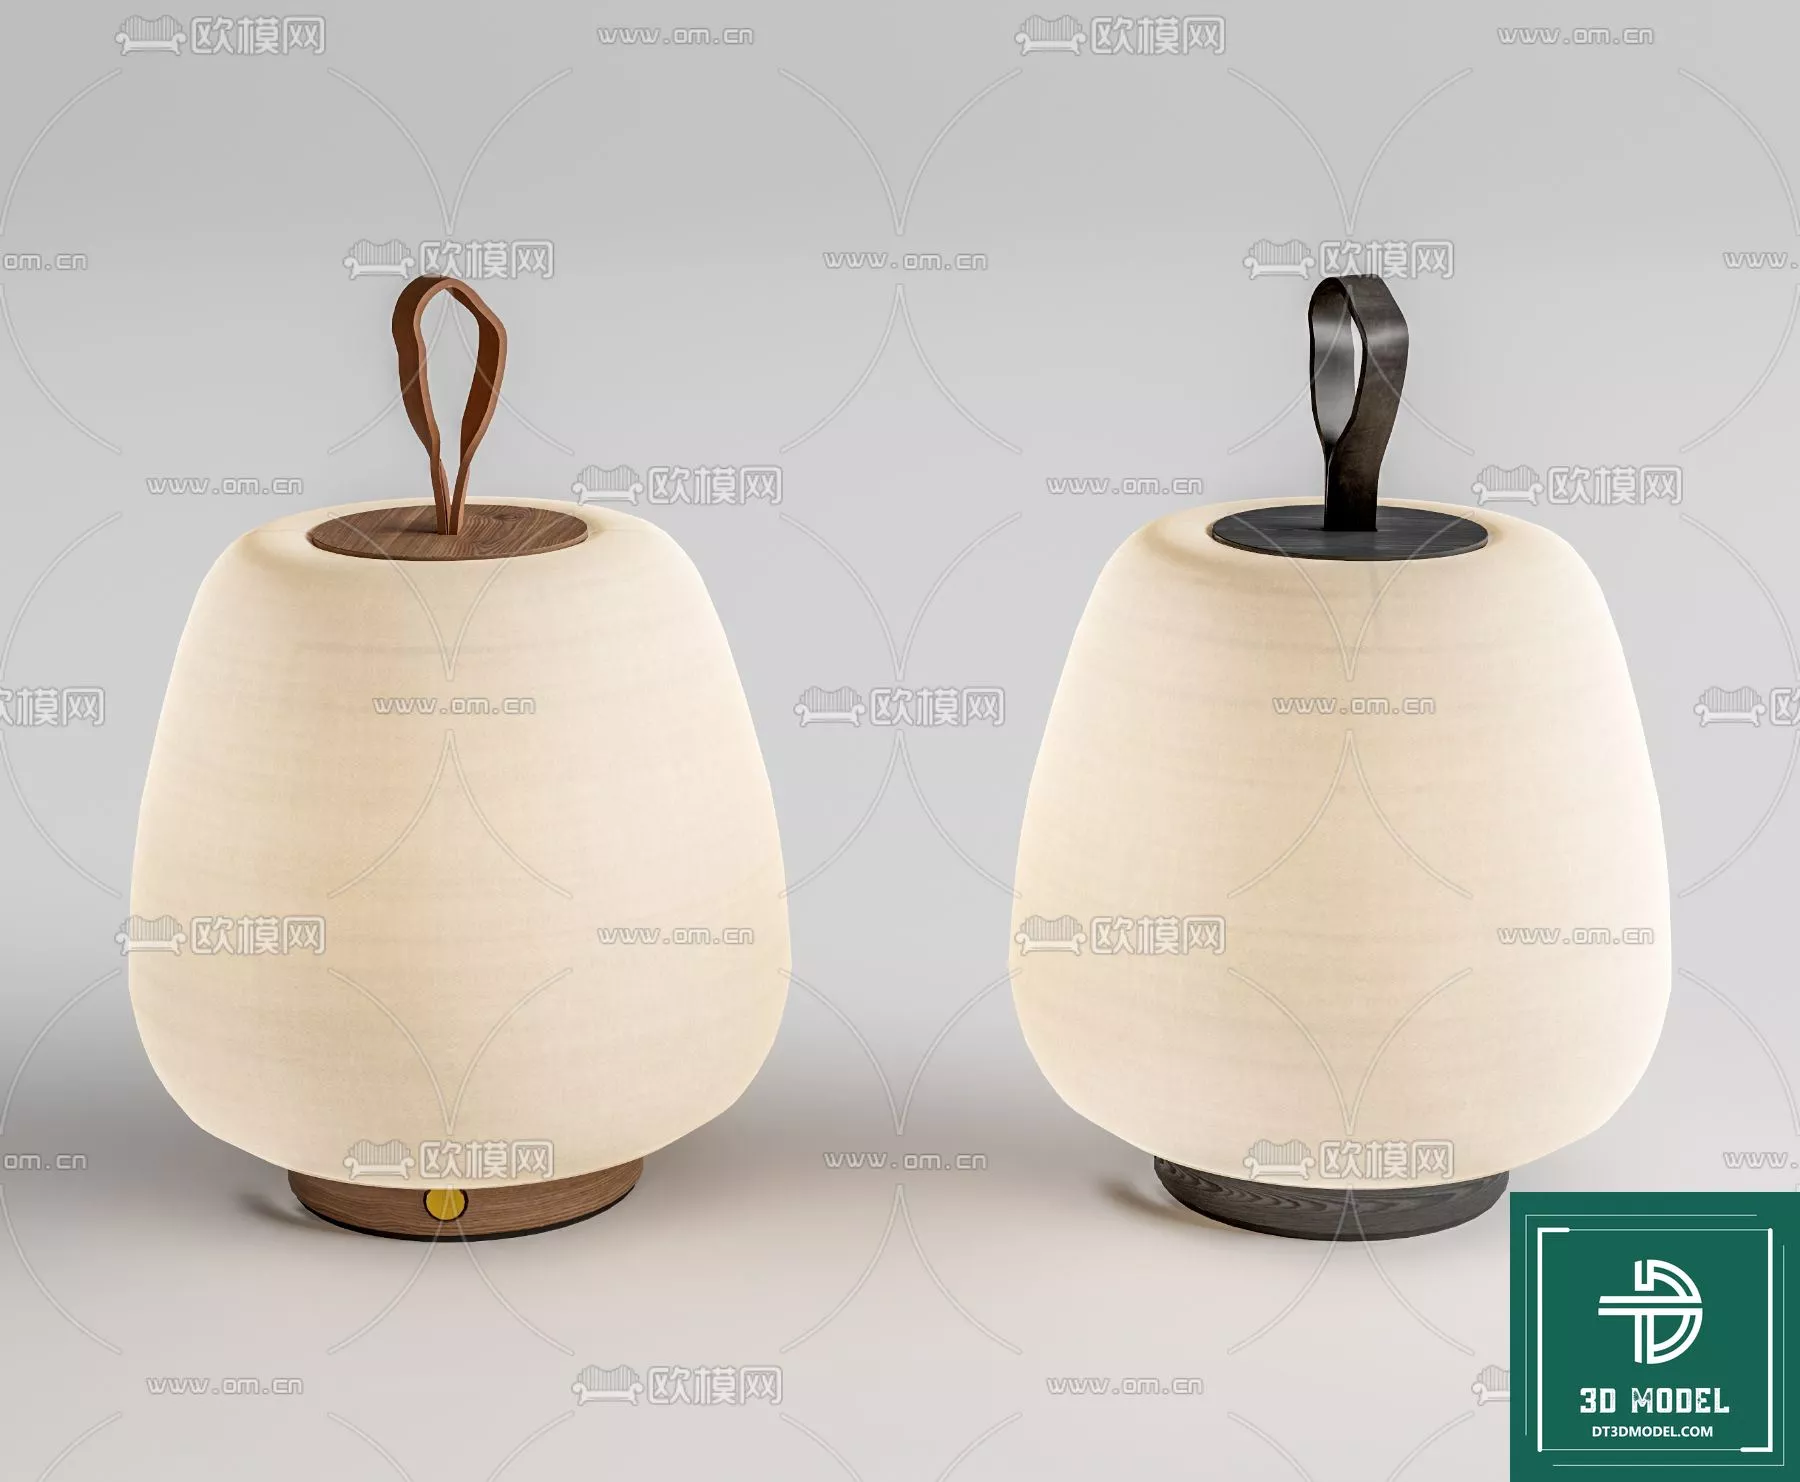 MODERN TABLE LAMP - SKETCHUP 3D MODEL - VRAY OR ENSCAPE - ID14592